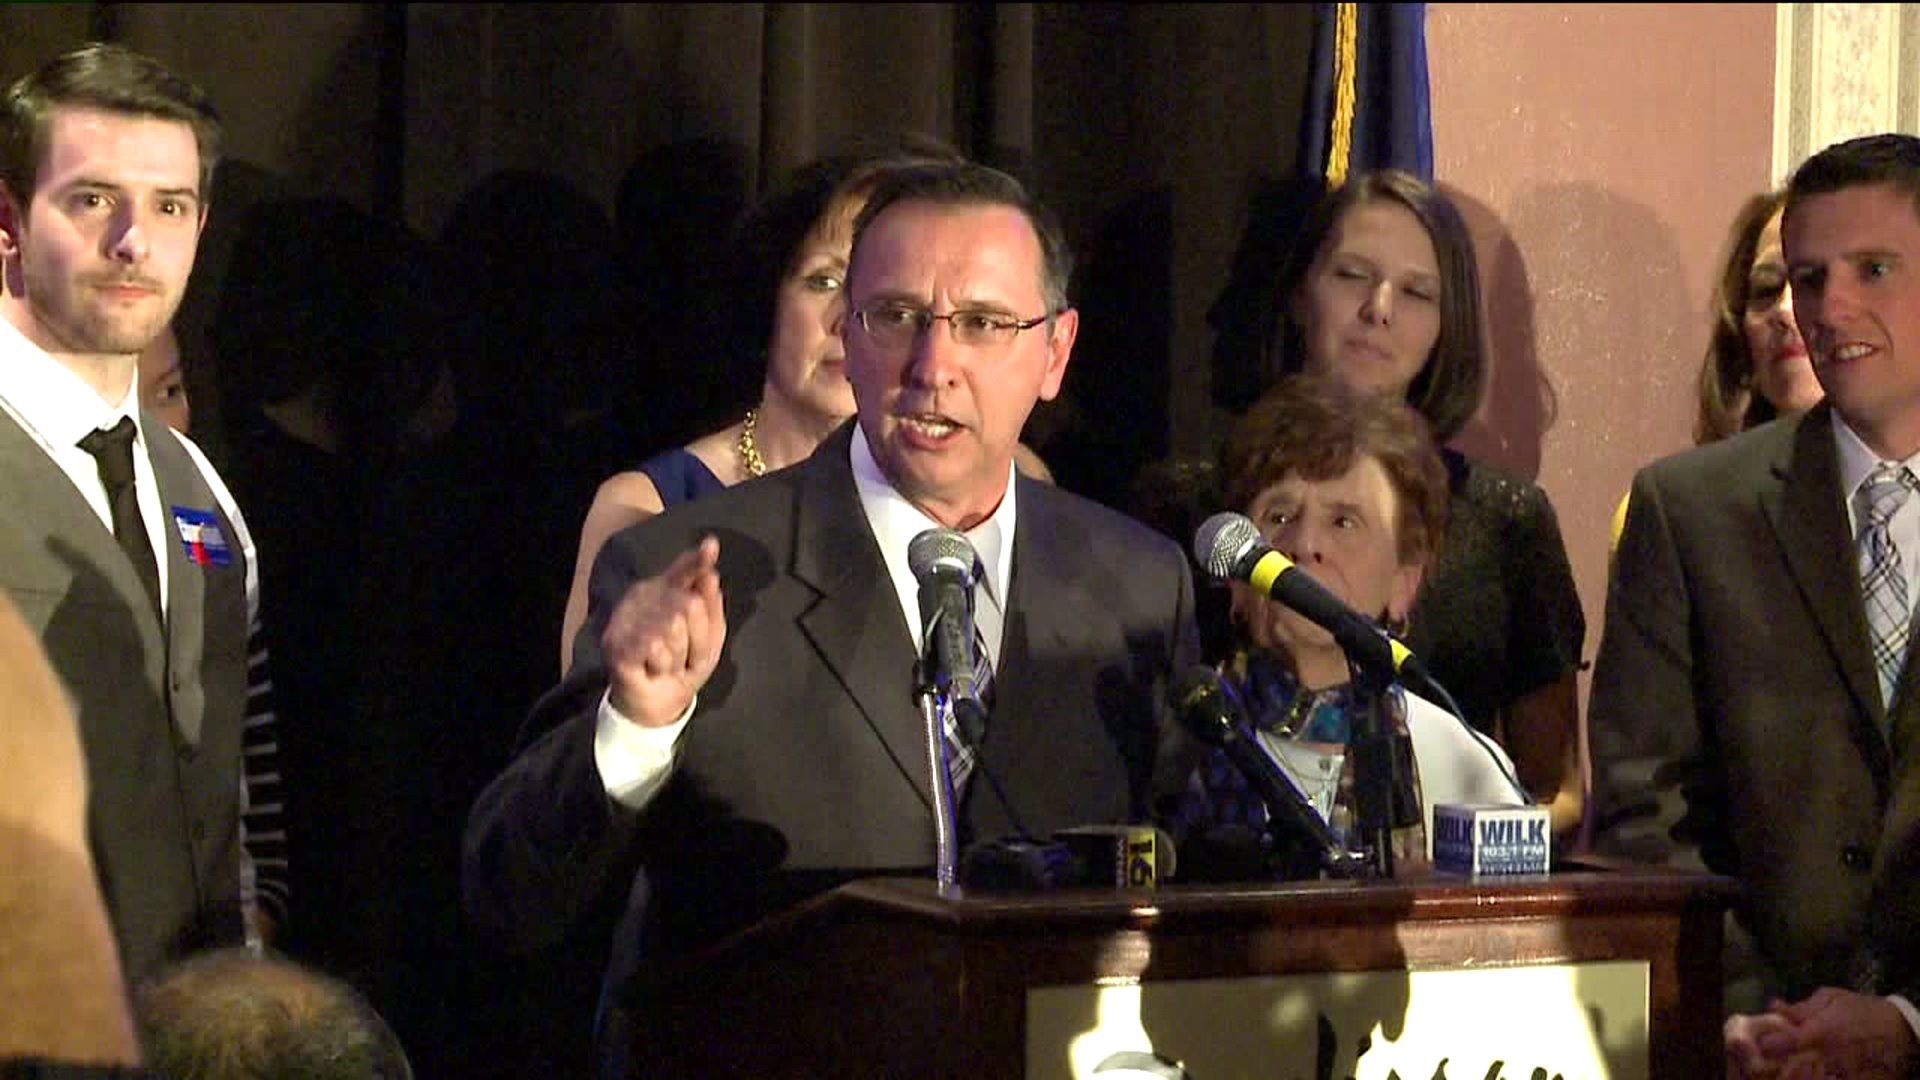 Scranton Mayor Bill Courtright Resigns After Federal Plea Deal on Corruption Charges